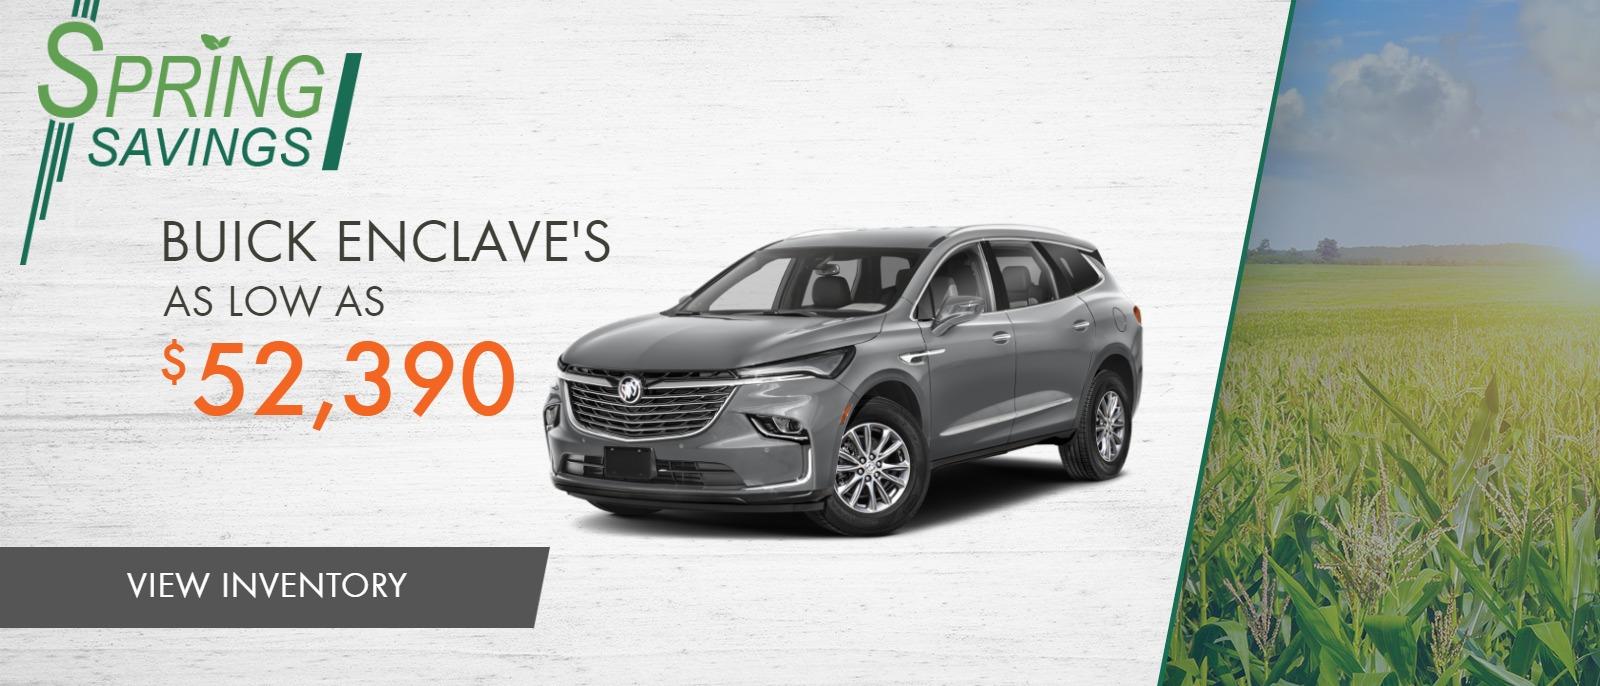 Buick Enclave's AS LOW AS $52,390